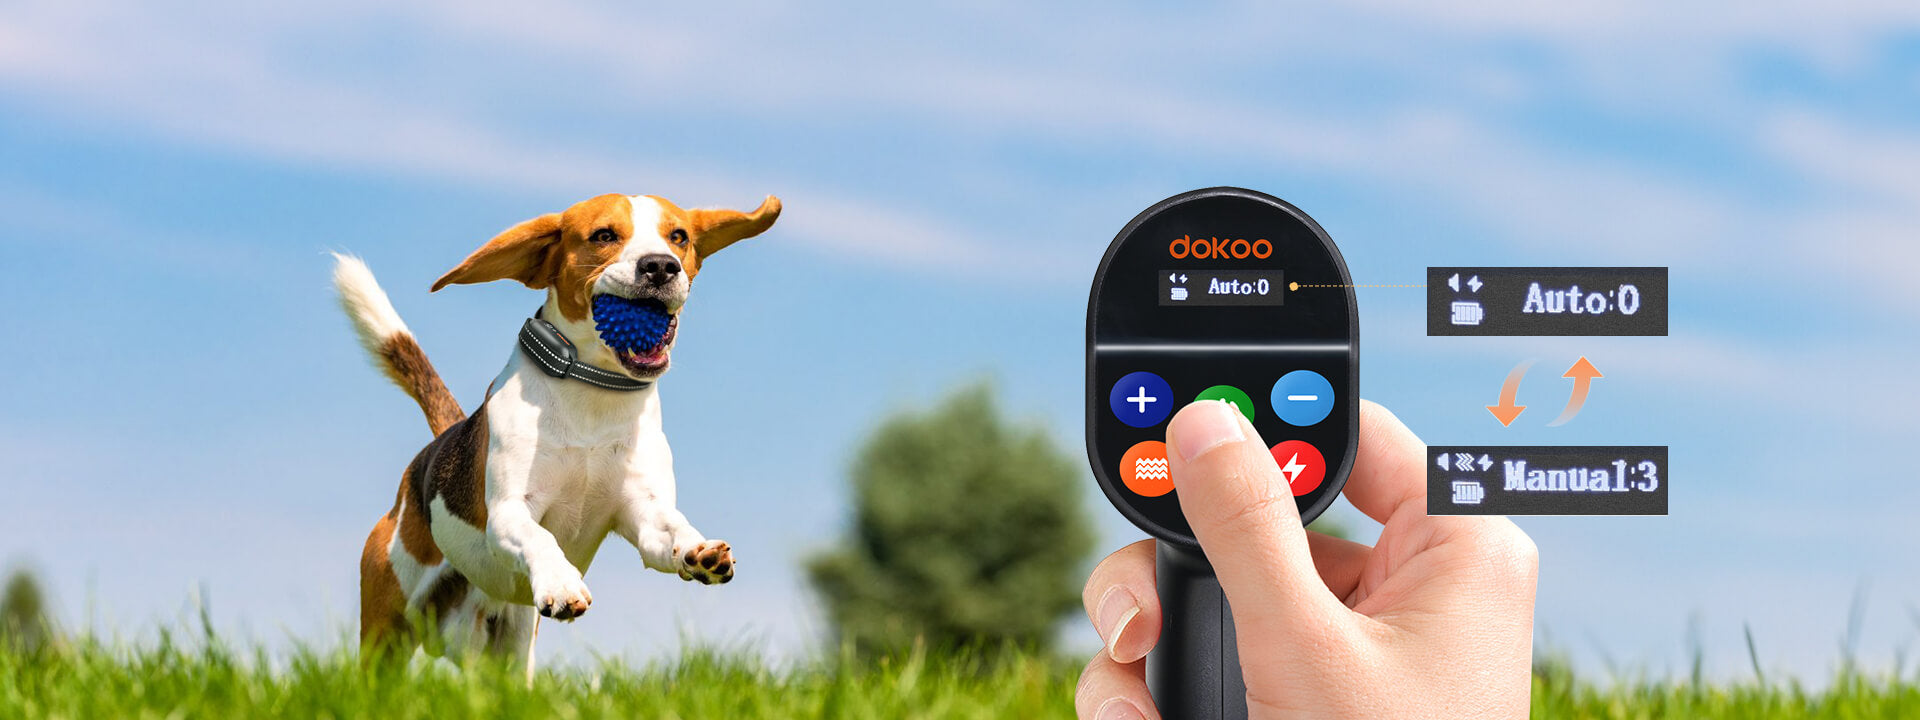 dokoo dog collar auto mode and manual mode easy switch